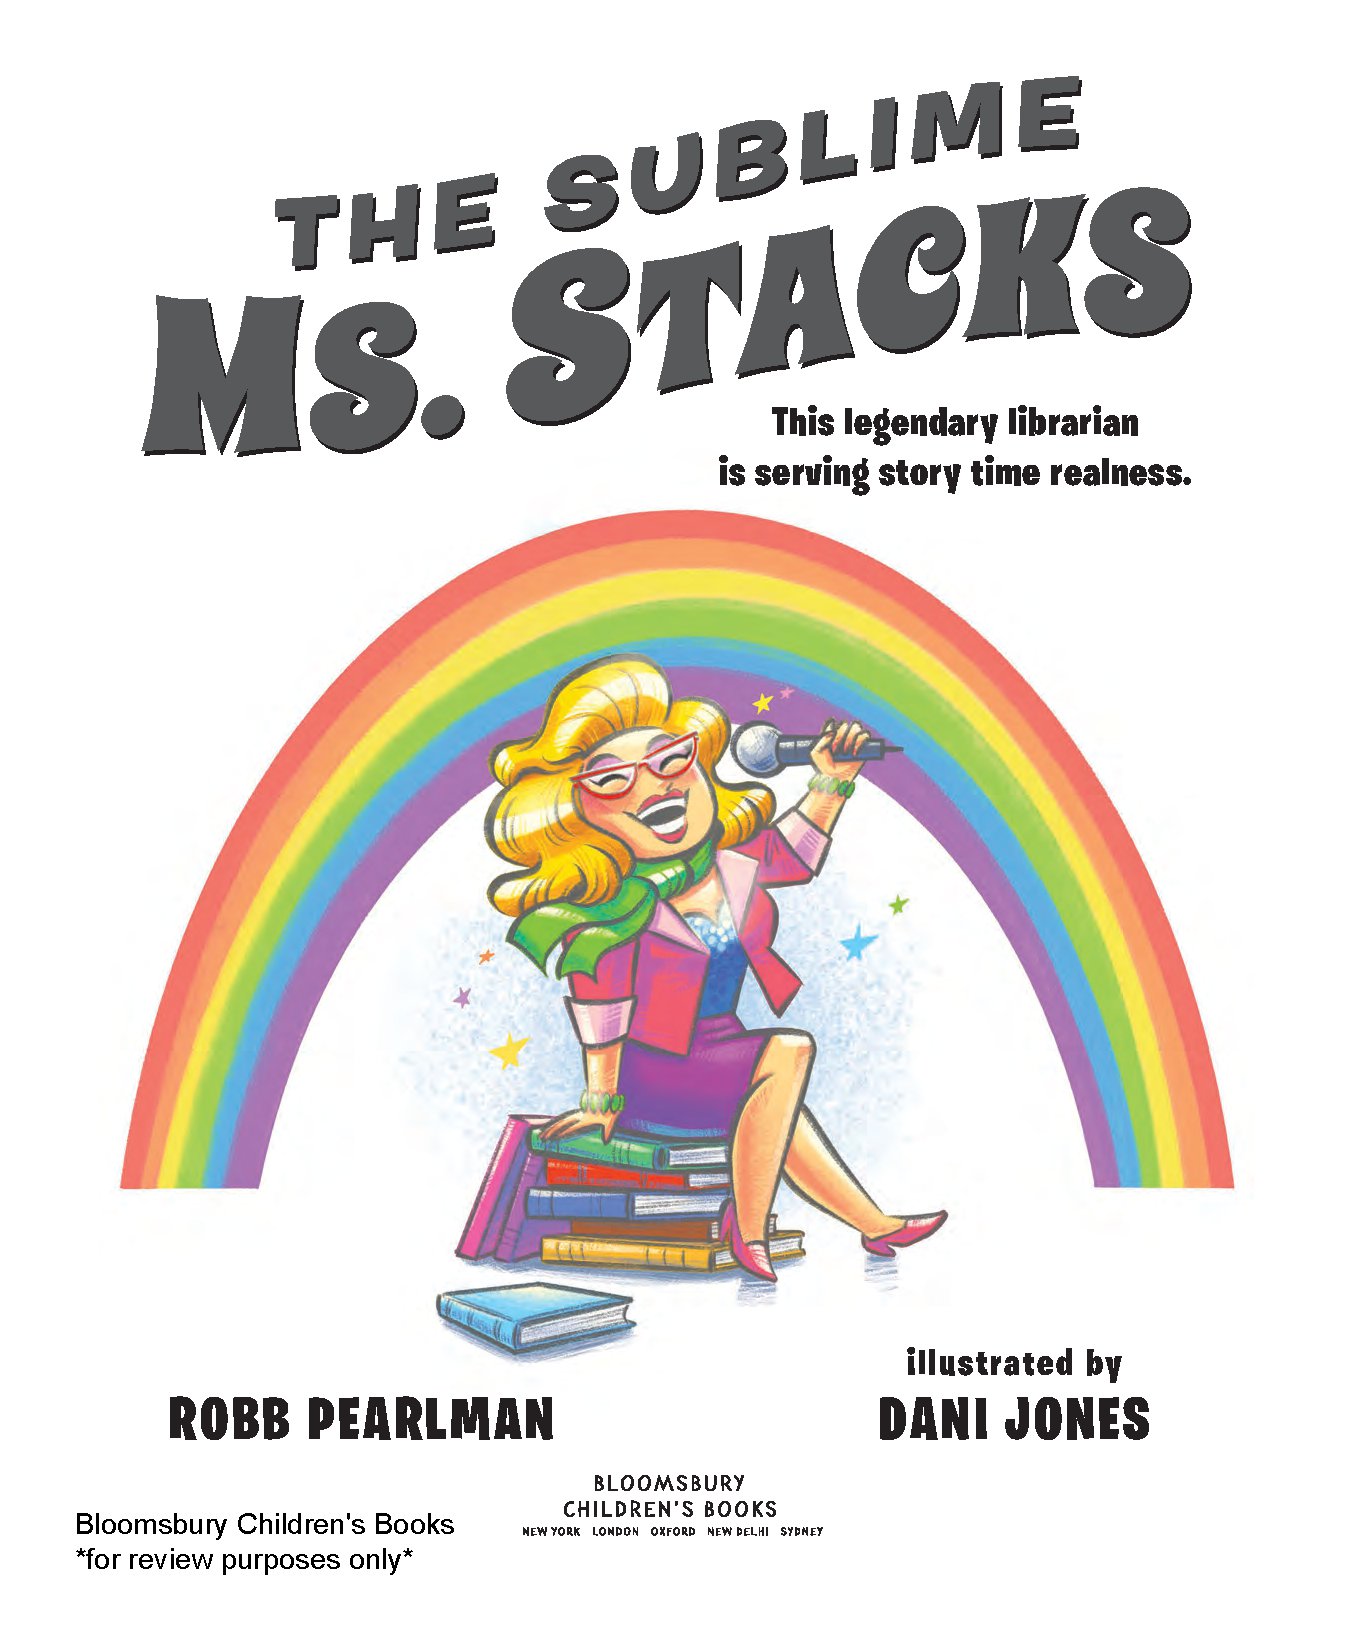 The Sublime Ms. Stacks